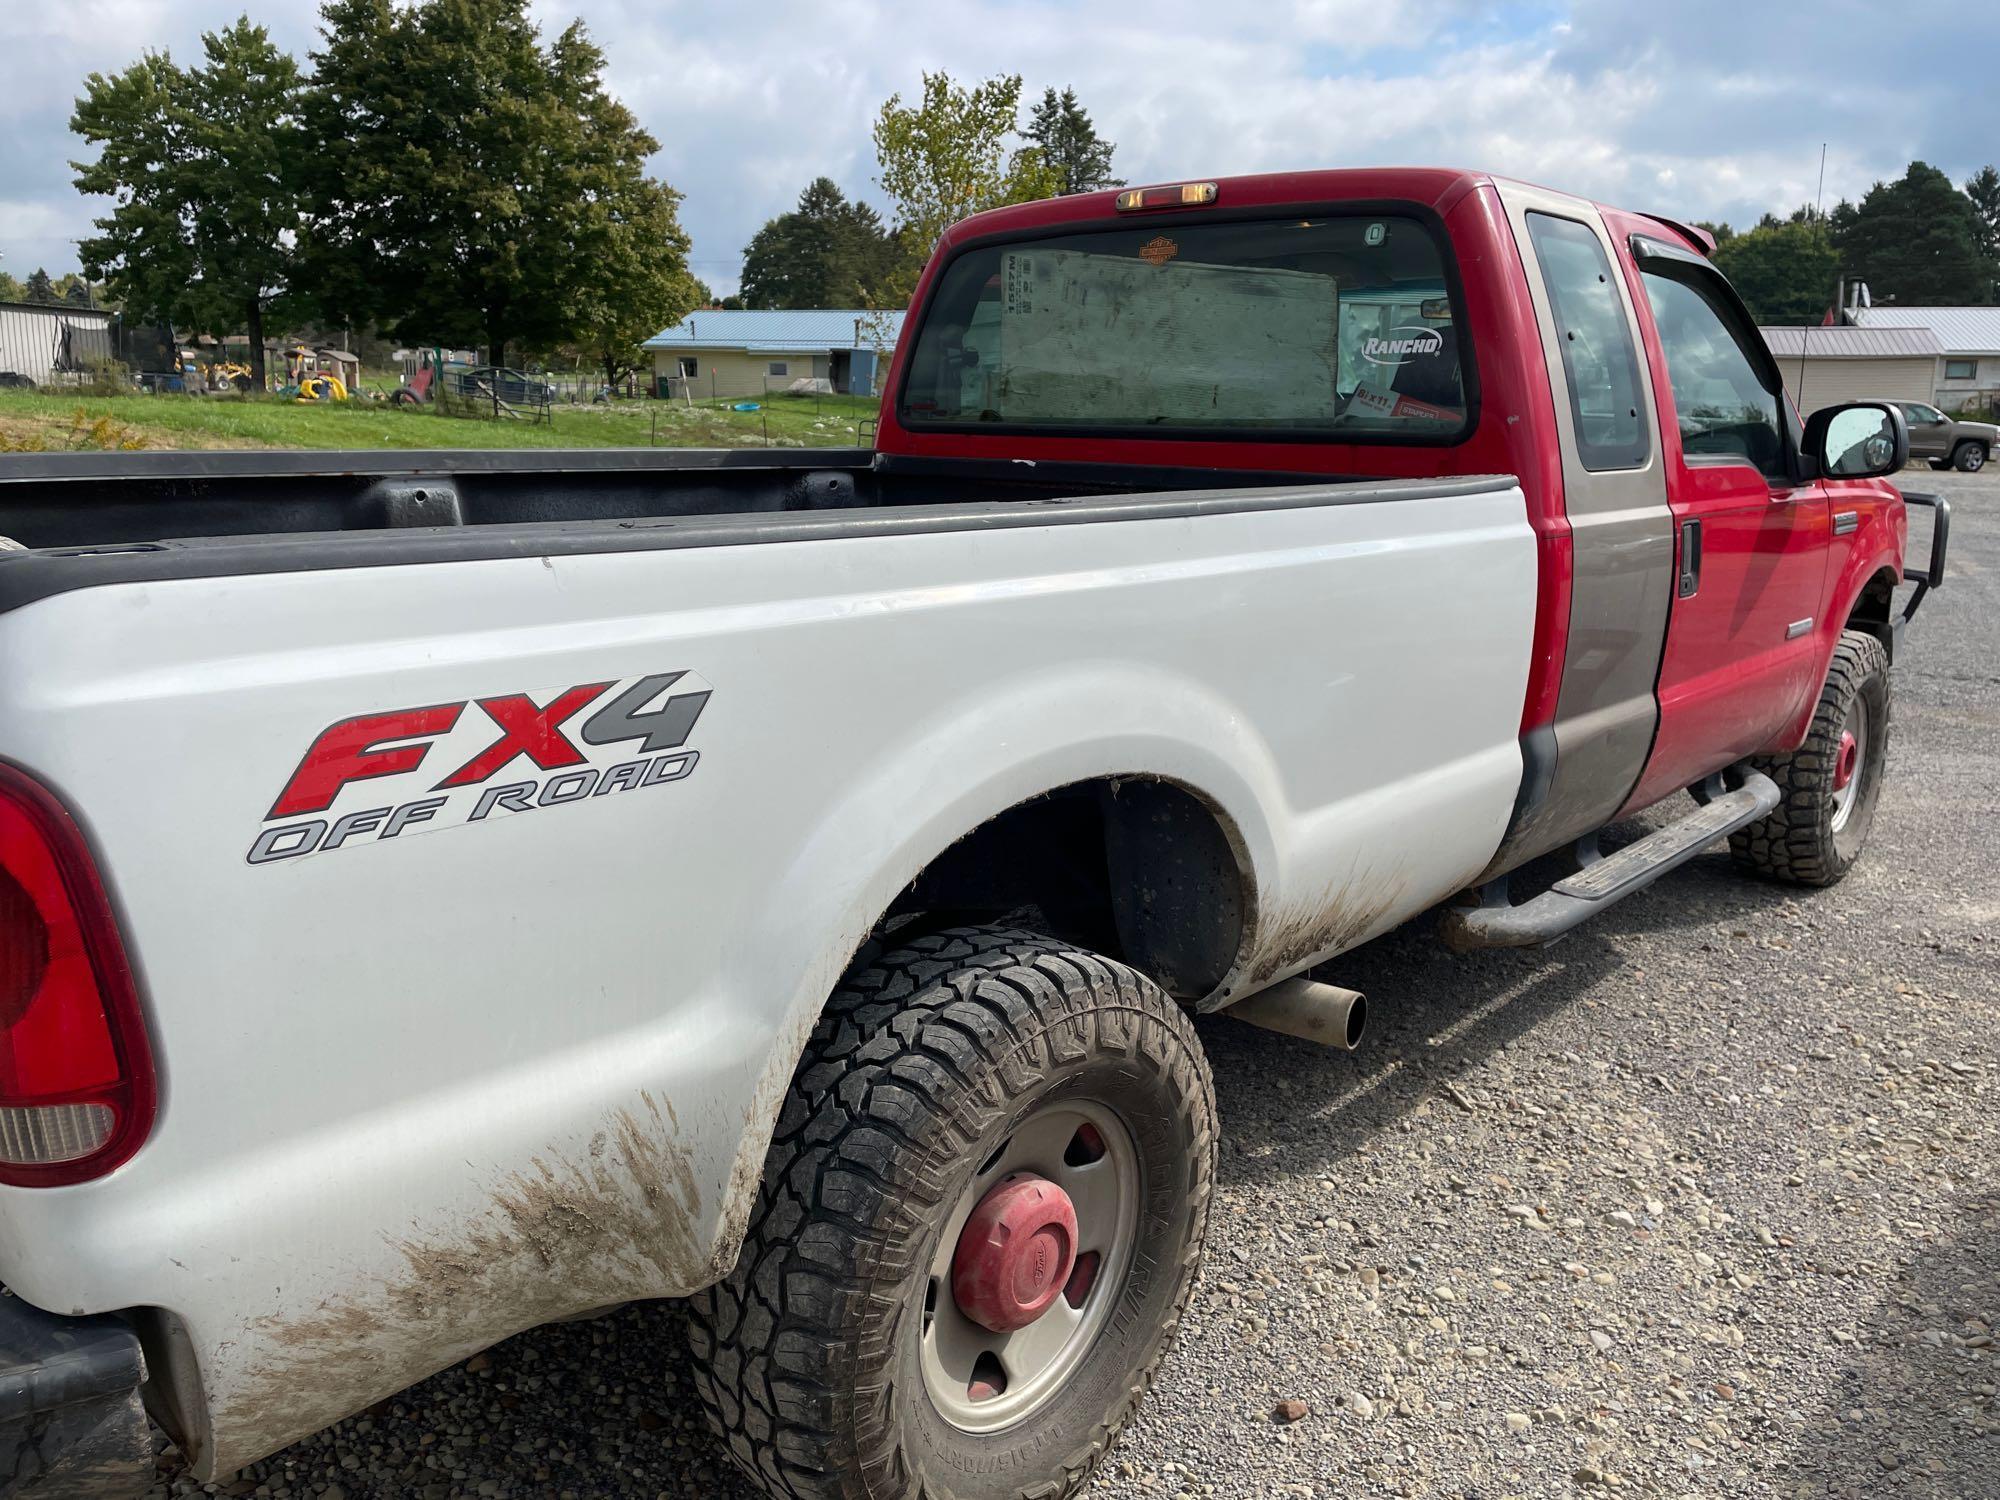 2006 Ford F-250 Extended Cab 4x4 diesel